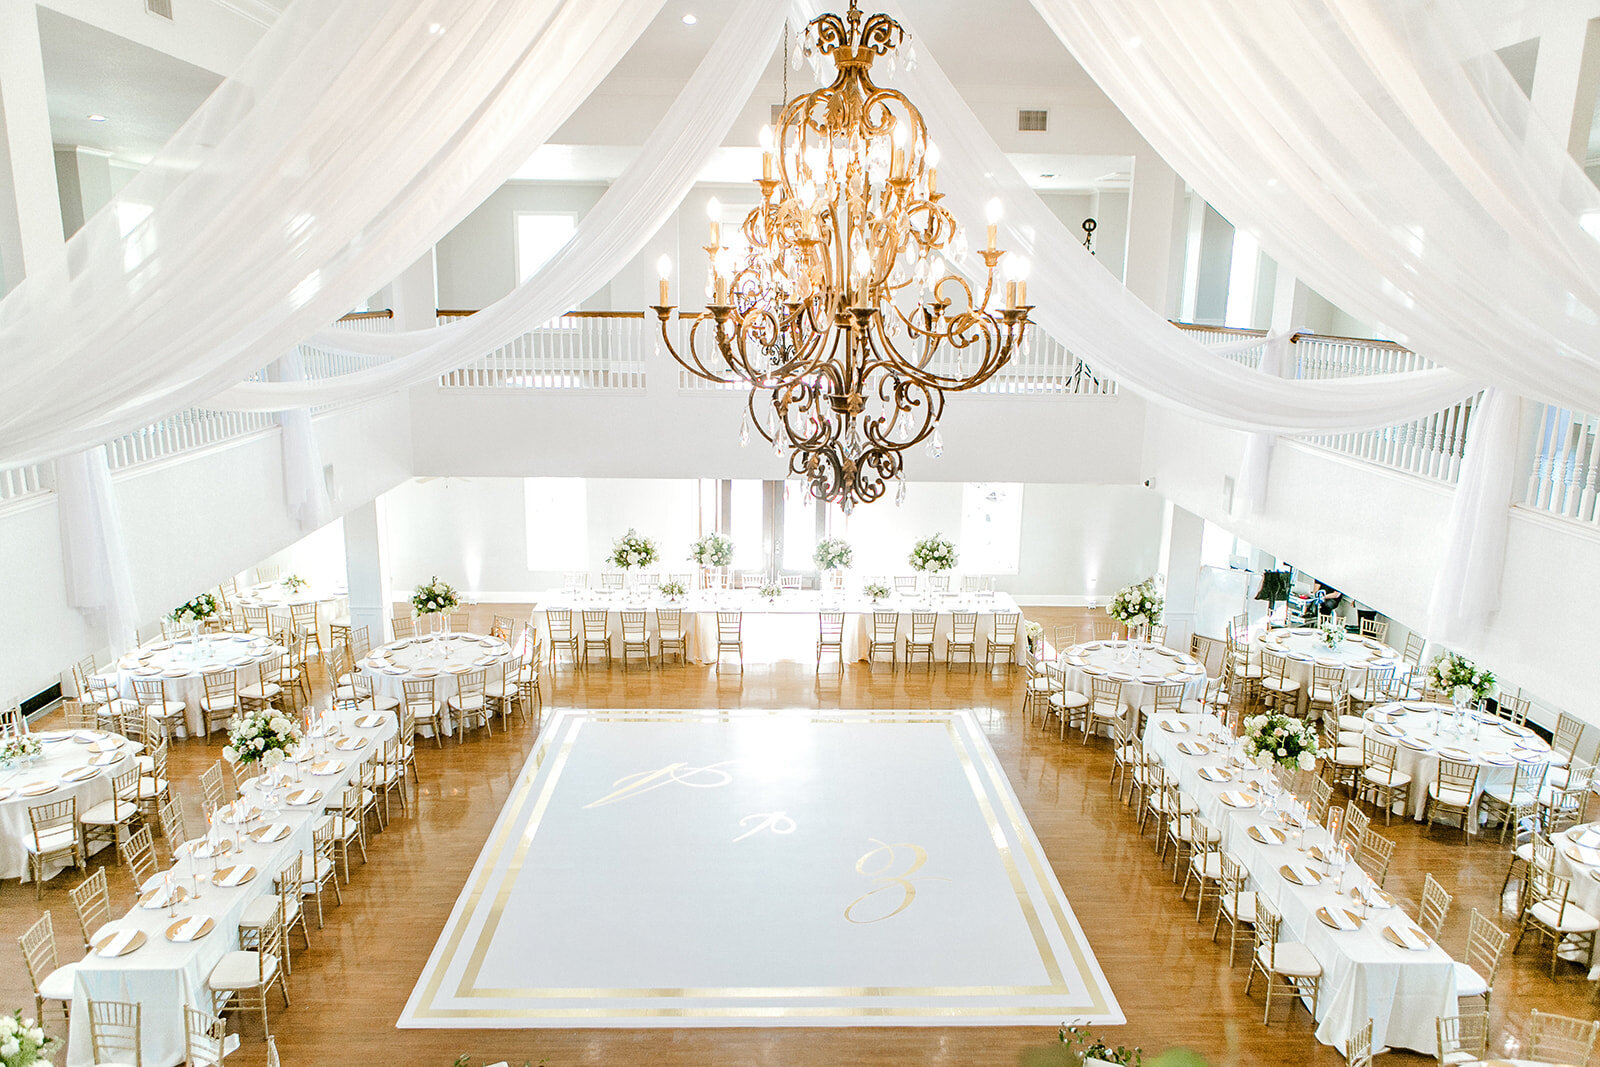 An ornate chandelier over the Kendall Point ballroom.